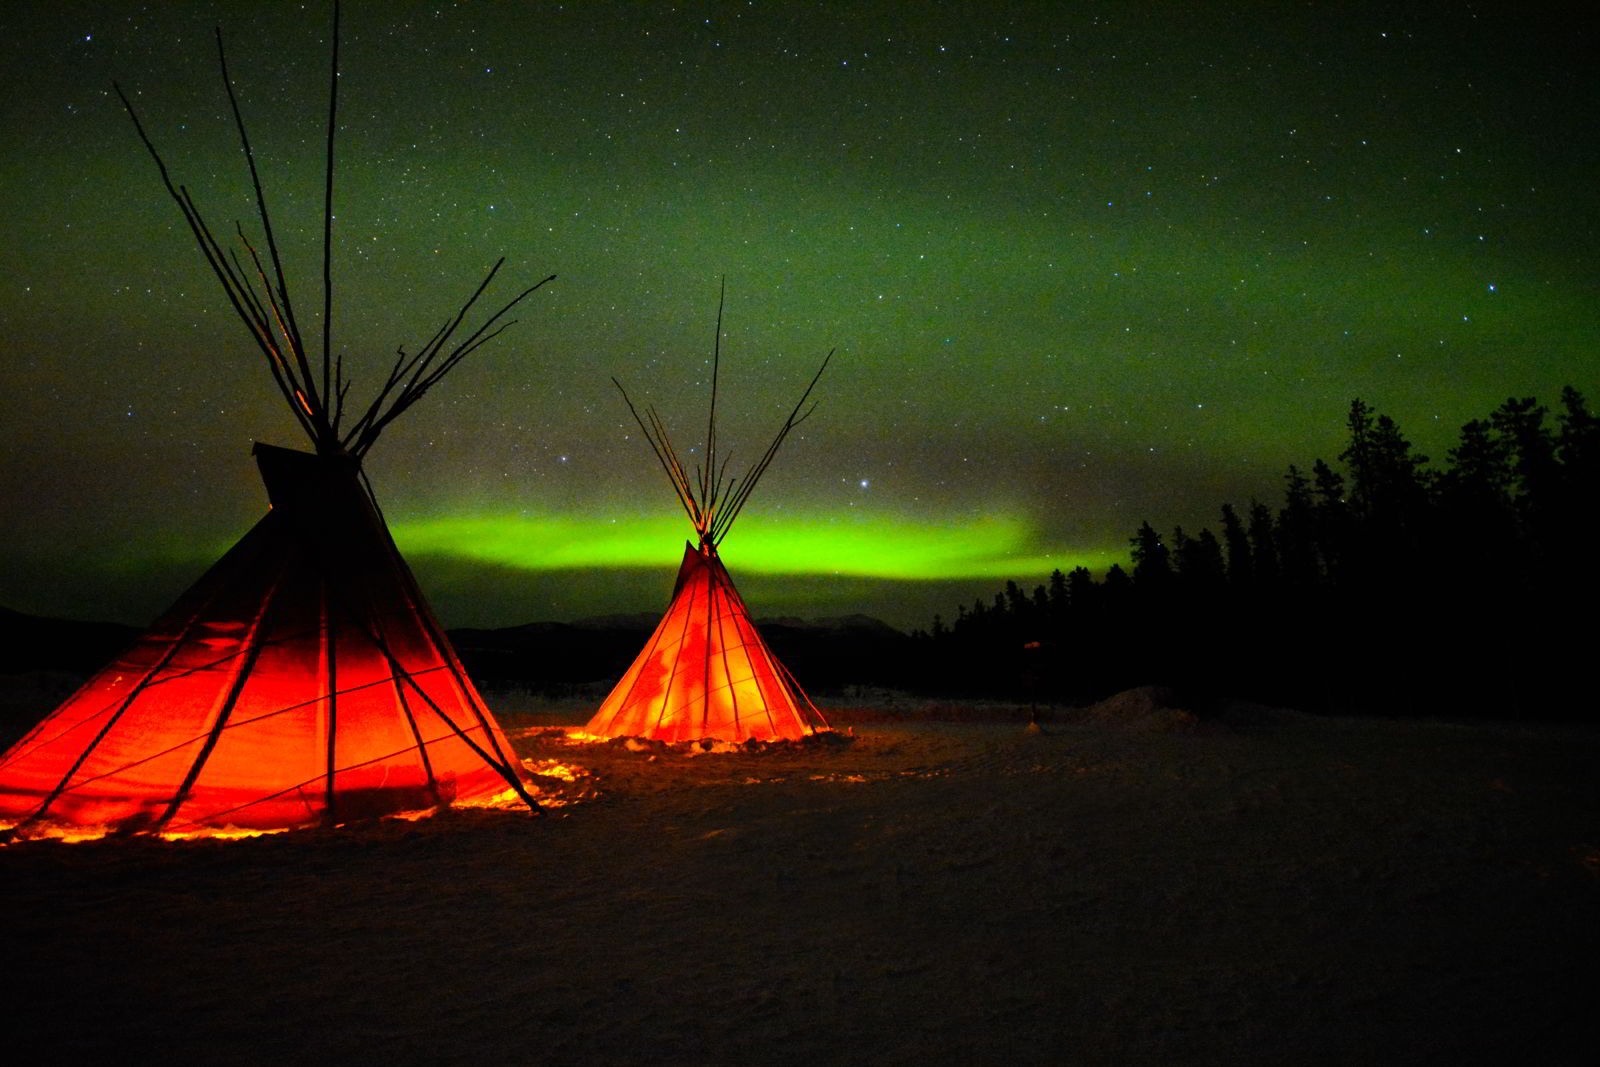 An image of the Yukon northern lights in winter with two tipis in the foreground.